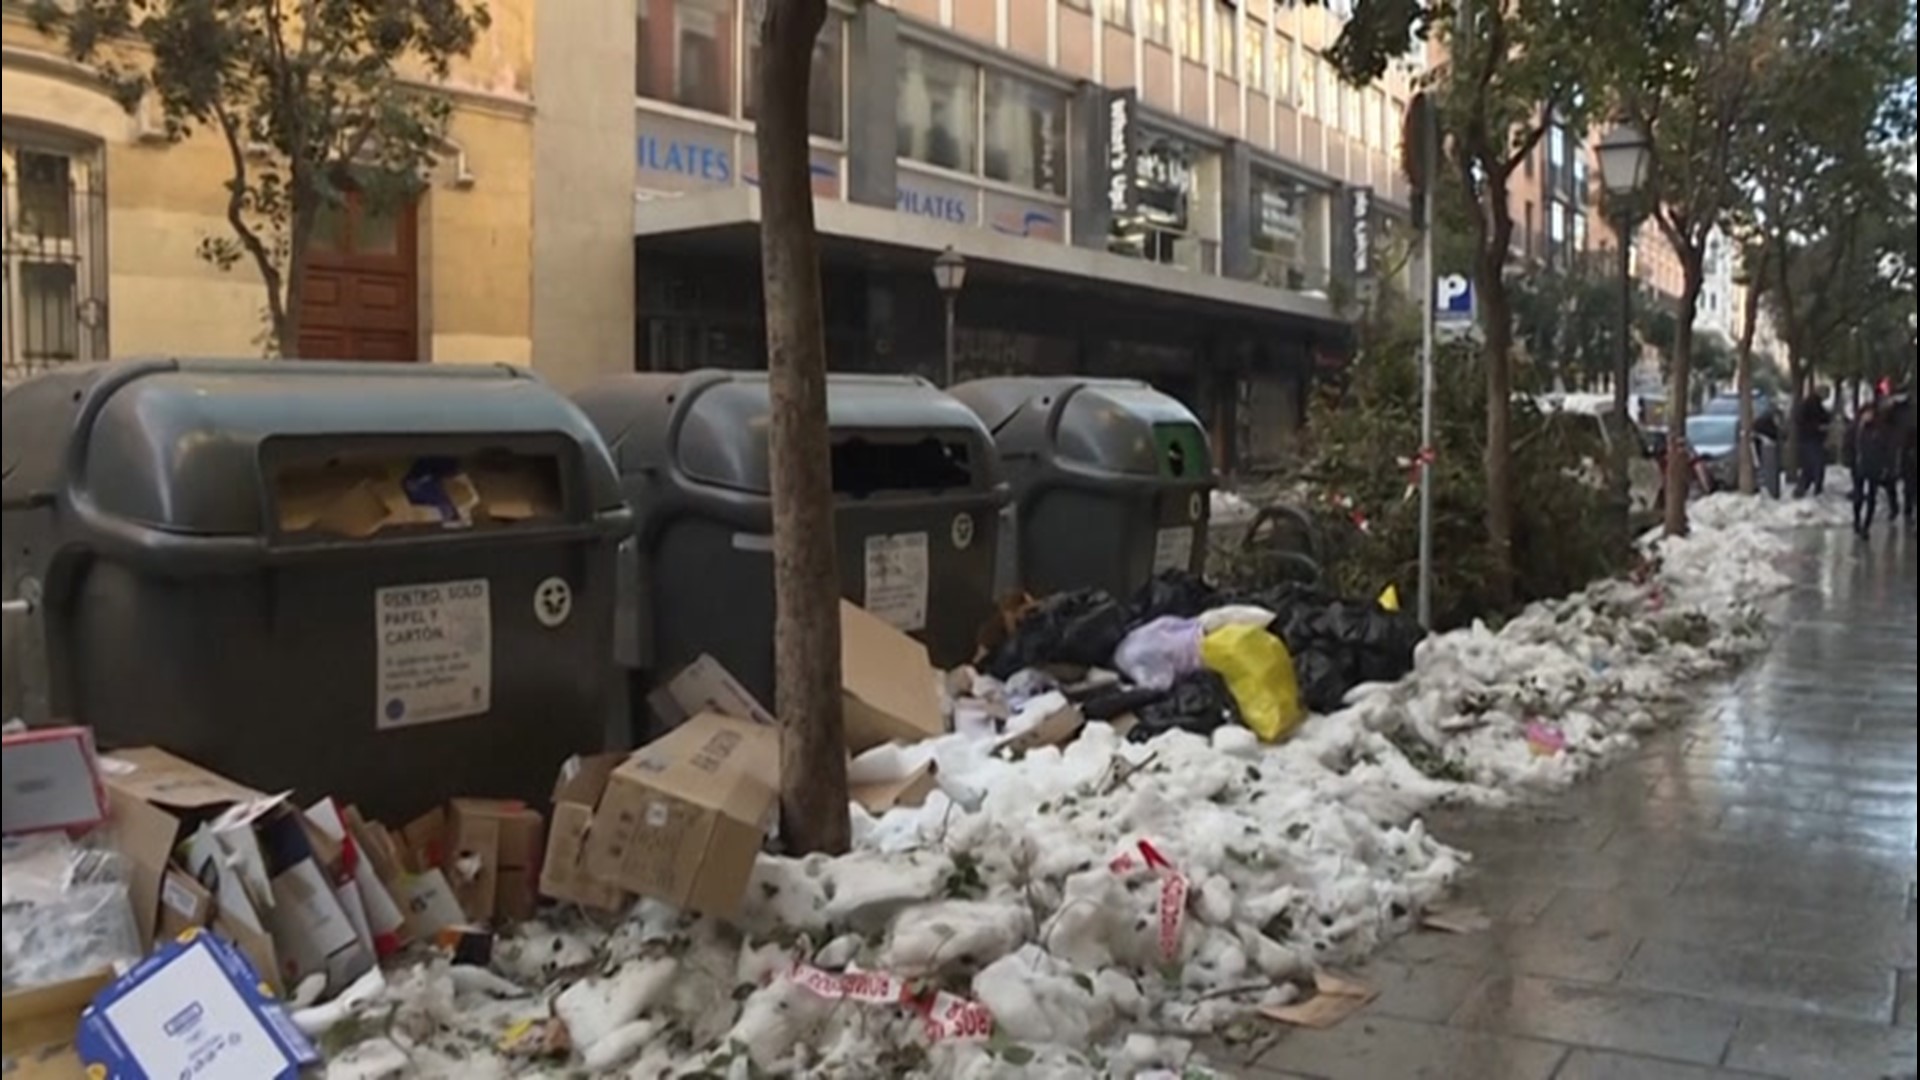 One week after the historic snowstorm Filomena, the Spanish capital of Madrid is still struggling to clean up the snow and ice that hit the area hard.